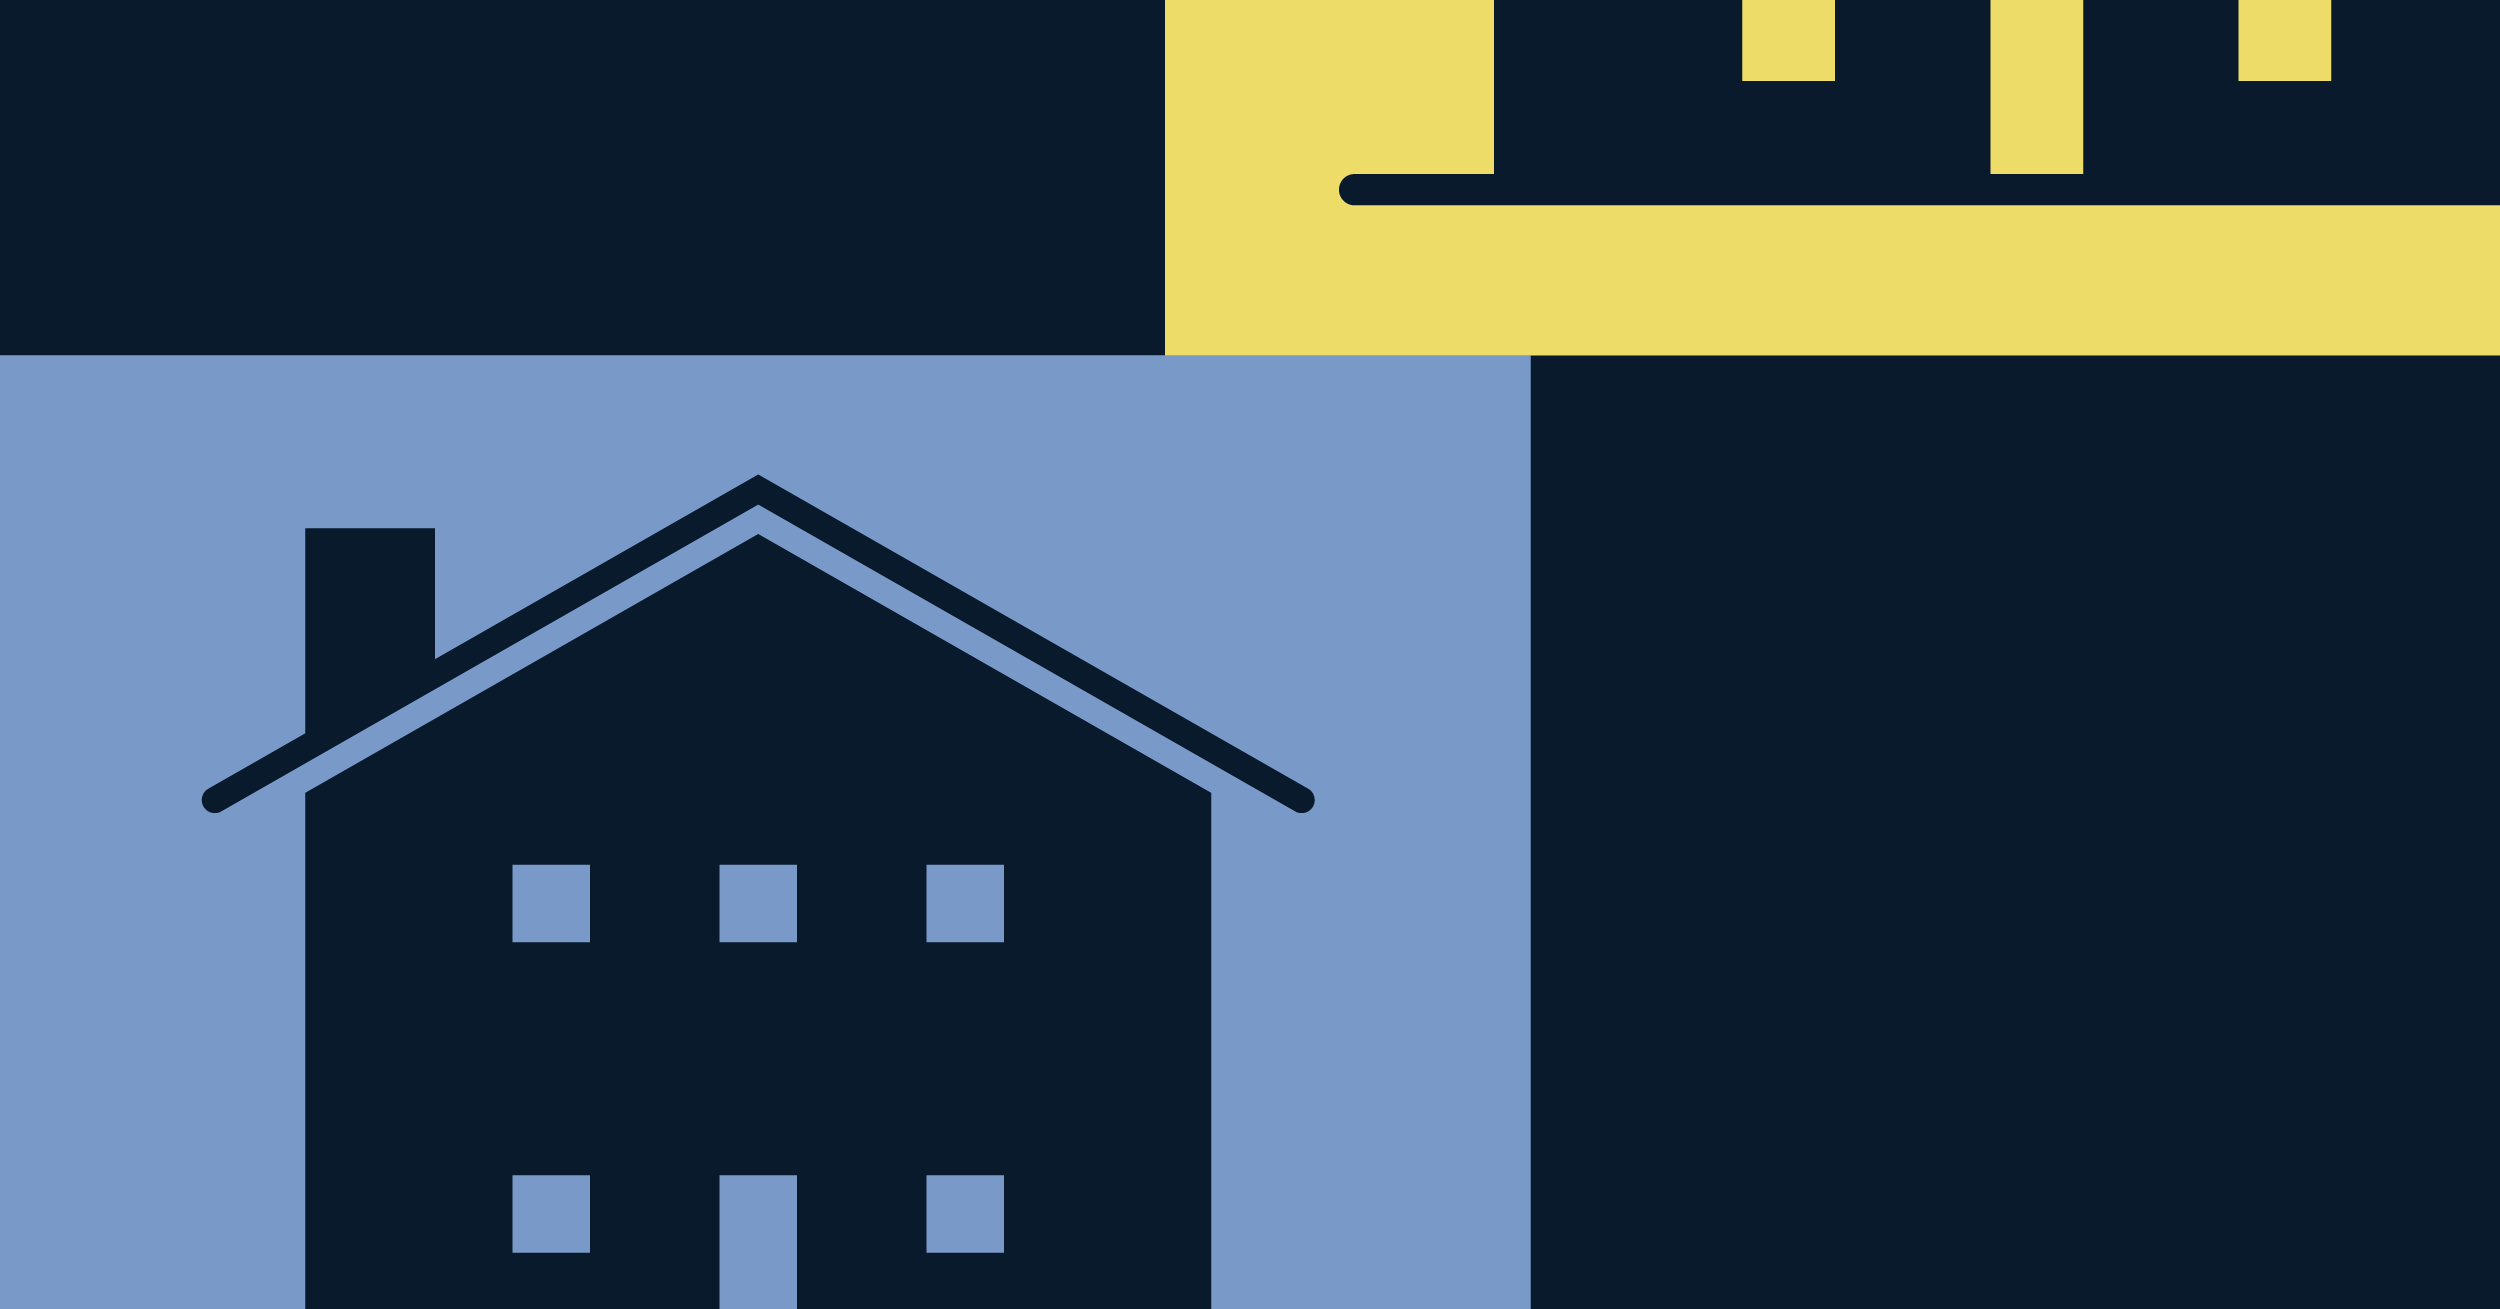 Illustration of a black two story house outlined in blue and part of a black two story house outlined in yellow in front of a black background depicting the real estate industry